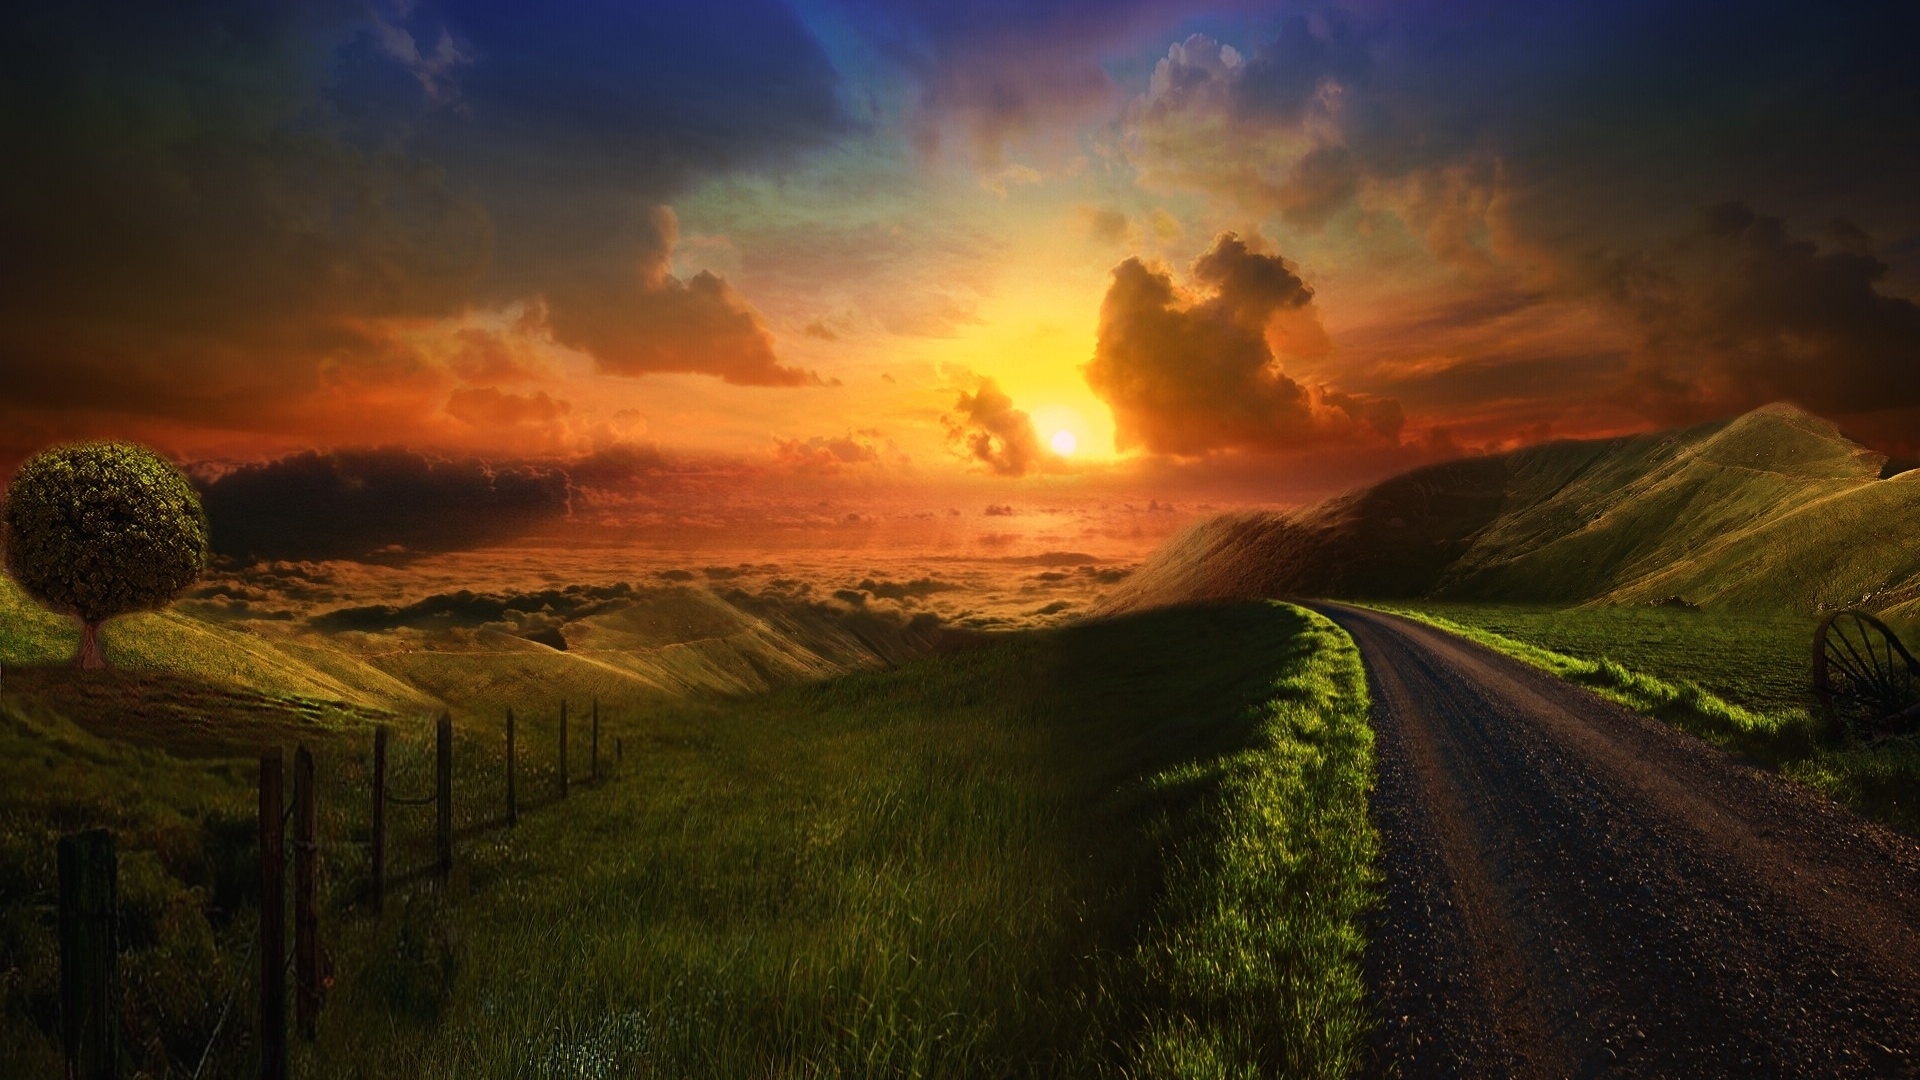 Sunset Valley Fences Road Desktop Pc And Mac Wallpaper